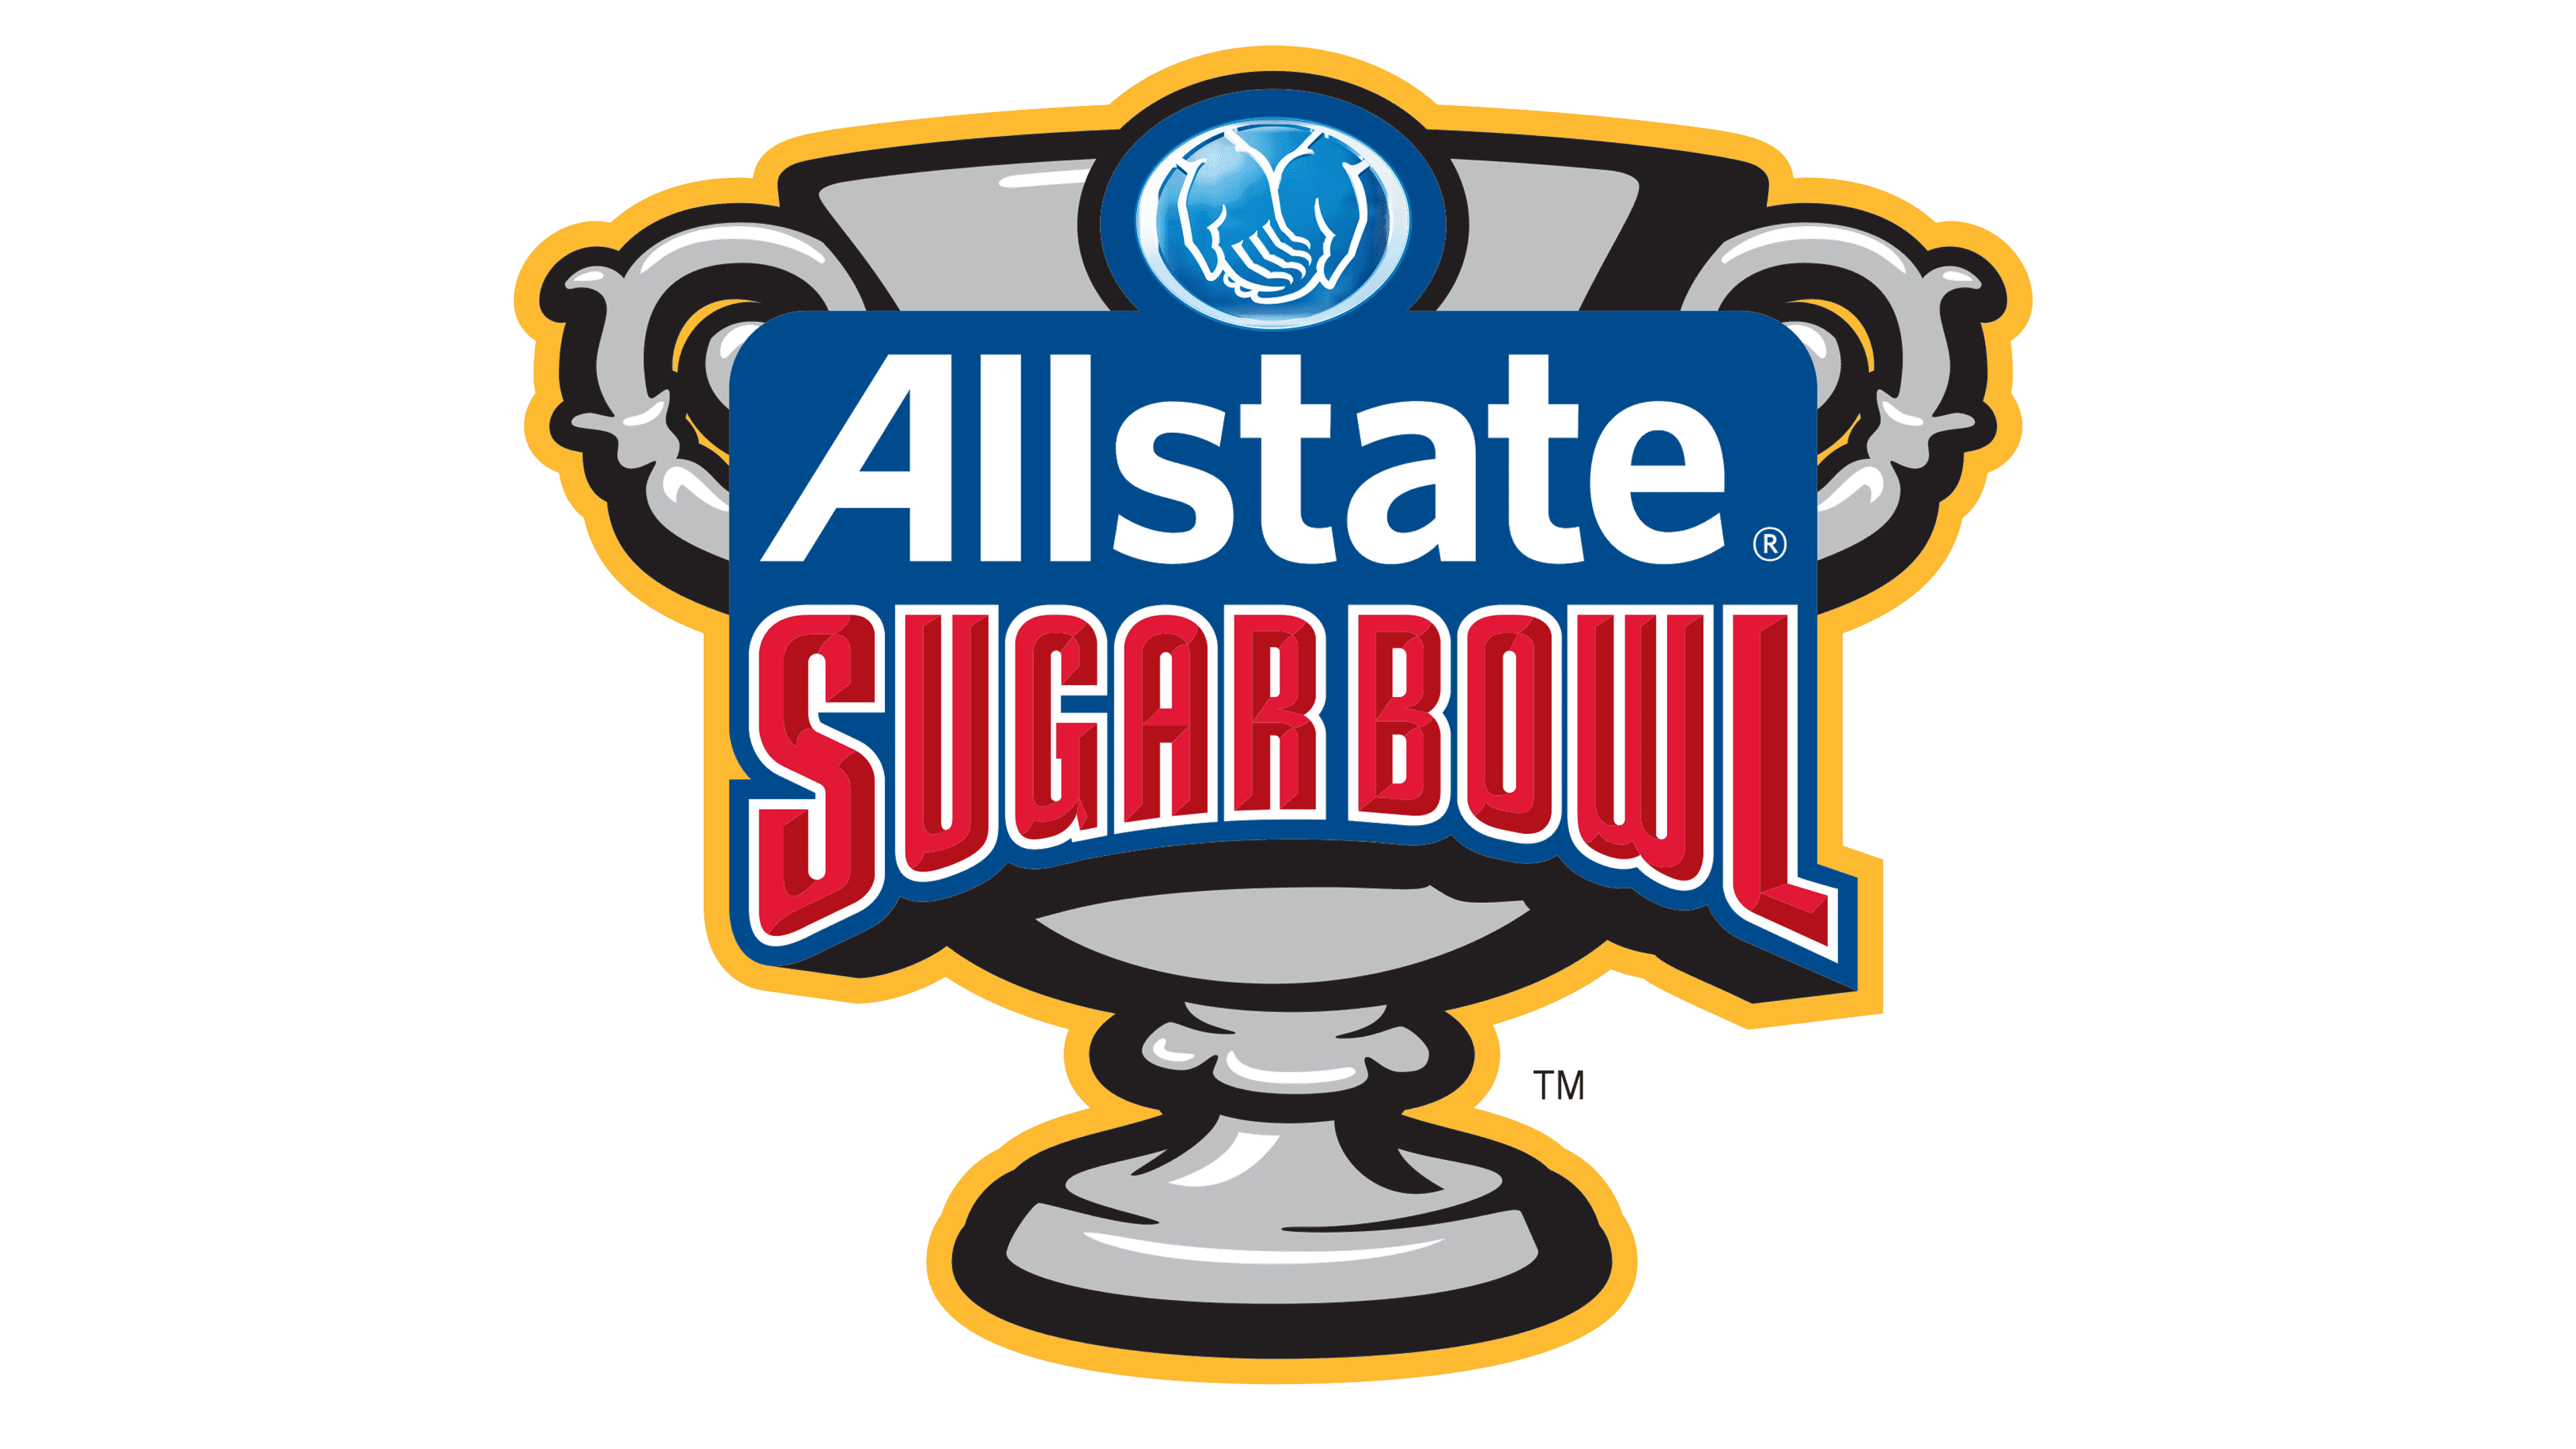 BCS Championship Game Logo and symbol, meaning, history, PNG, brand